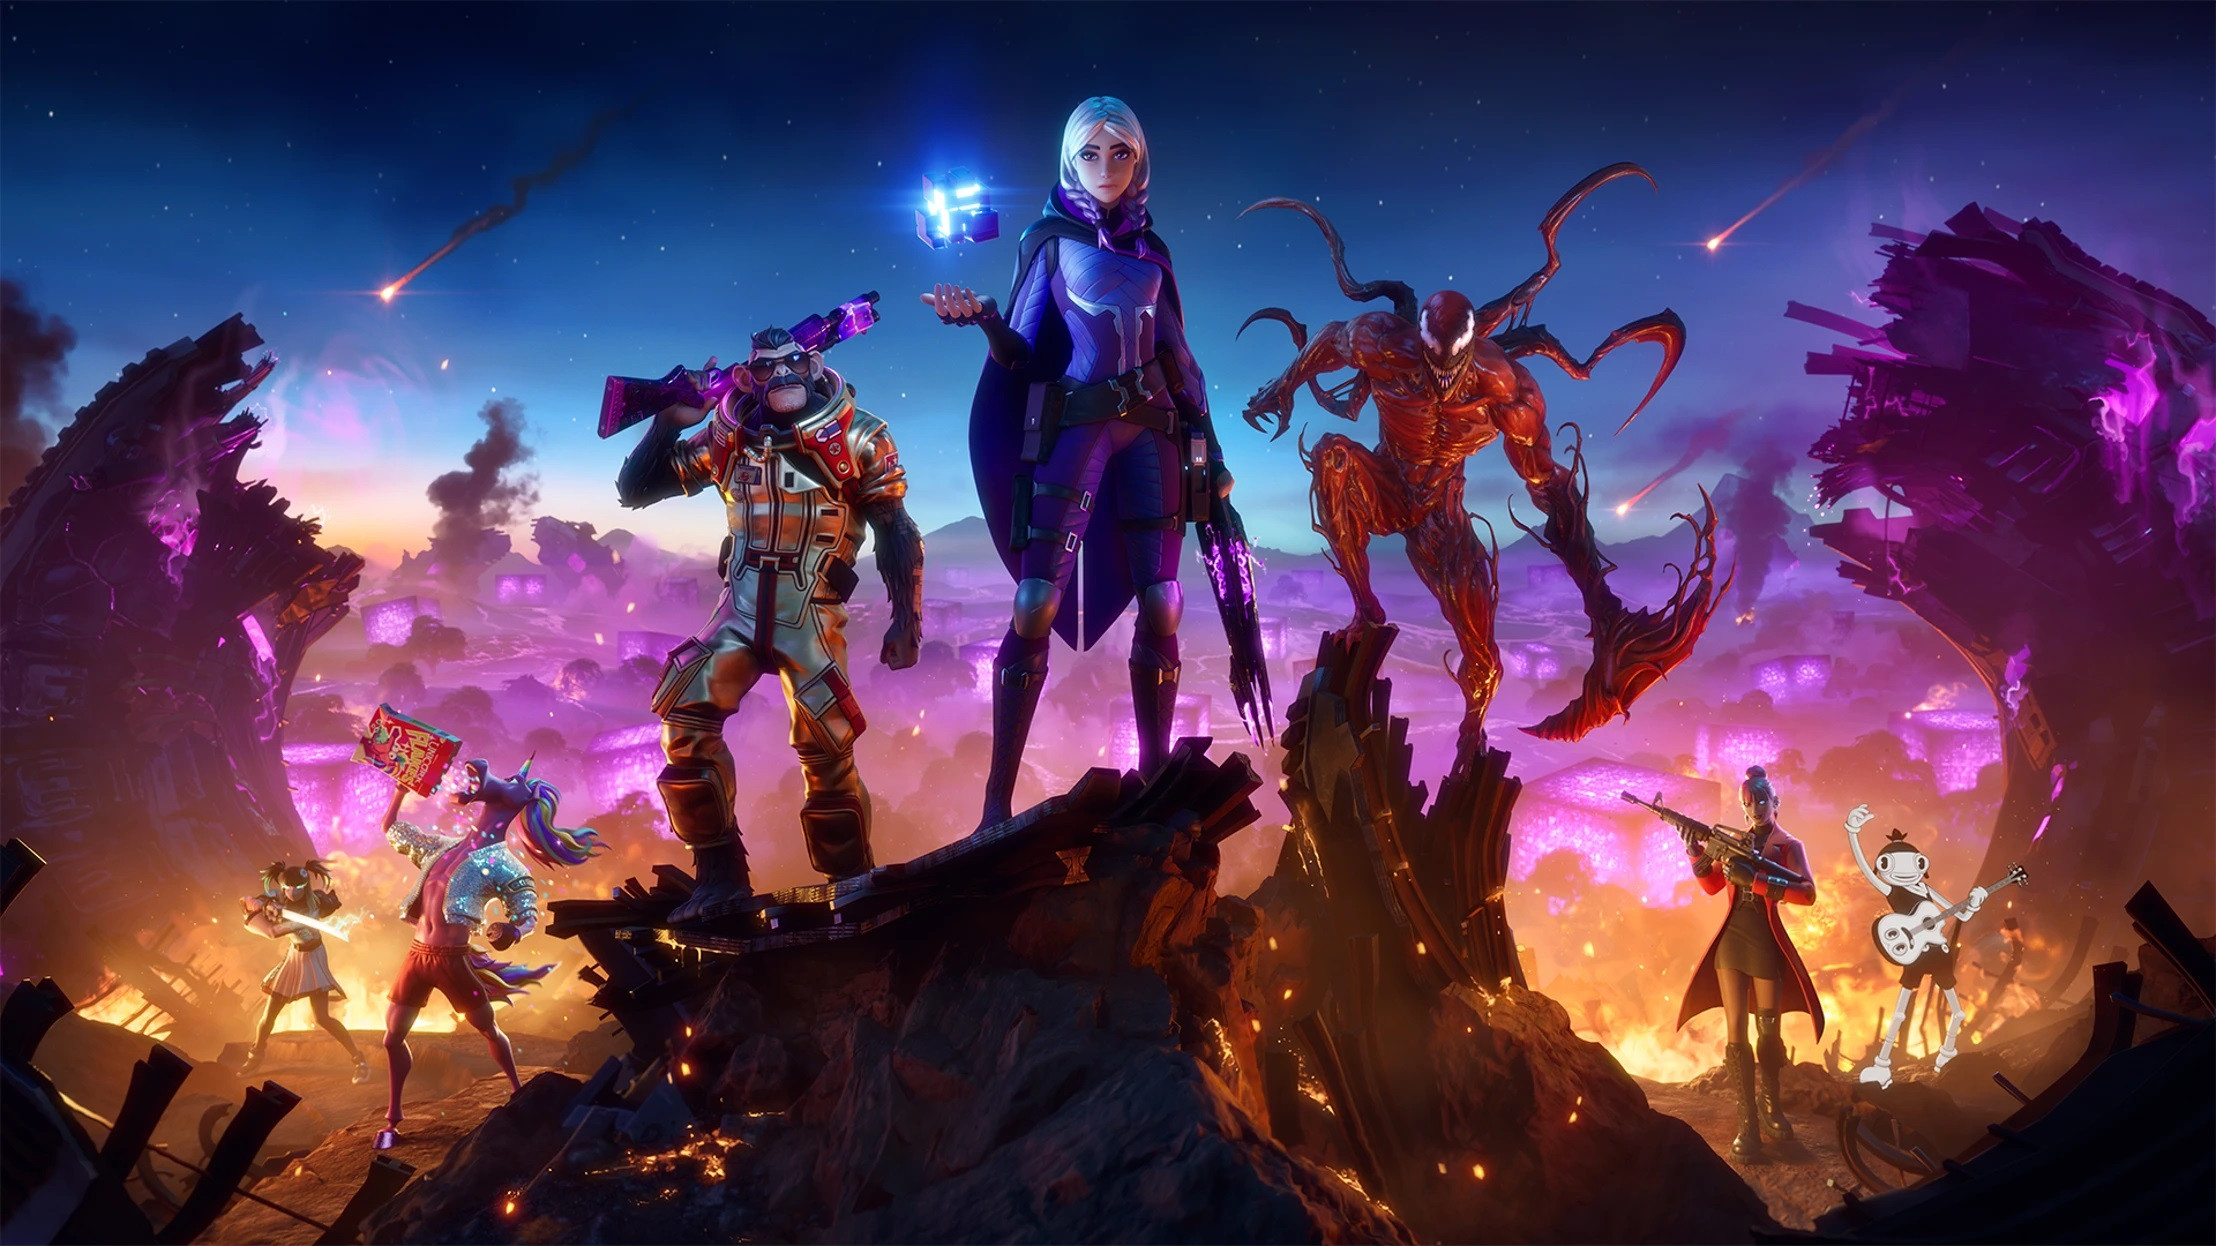 Fortnite Season 8 brings cubes and Carnage in time for Halloween